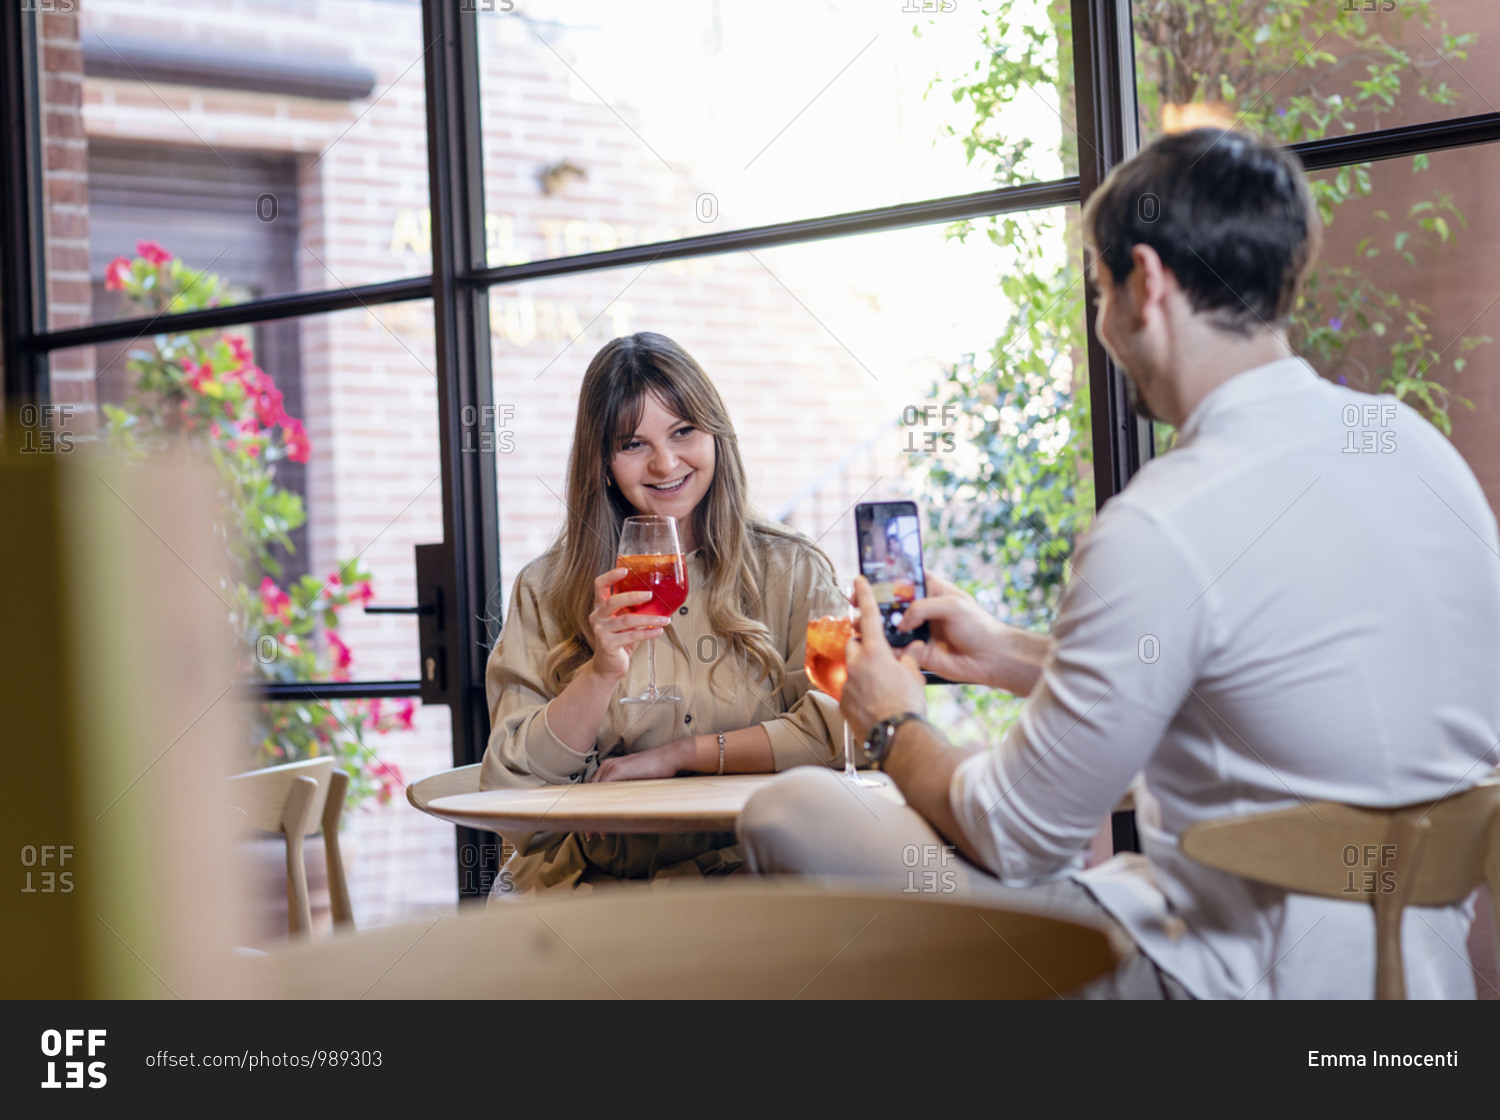 Young man with smartphone taking picture of happy girlfriend with glass of cocktail in hand while spending time together in cozy cafe